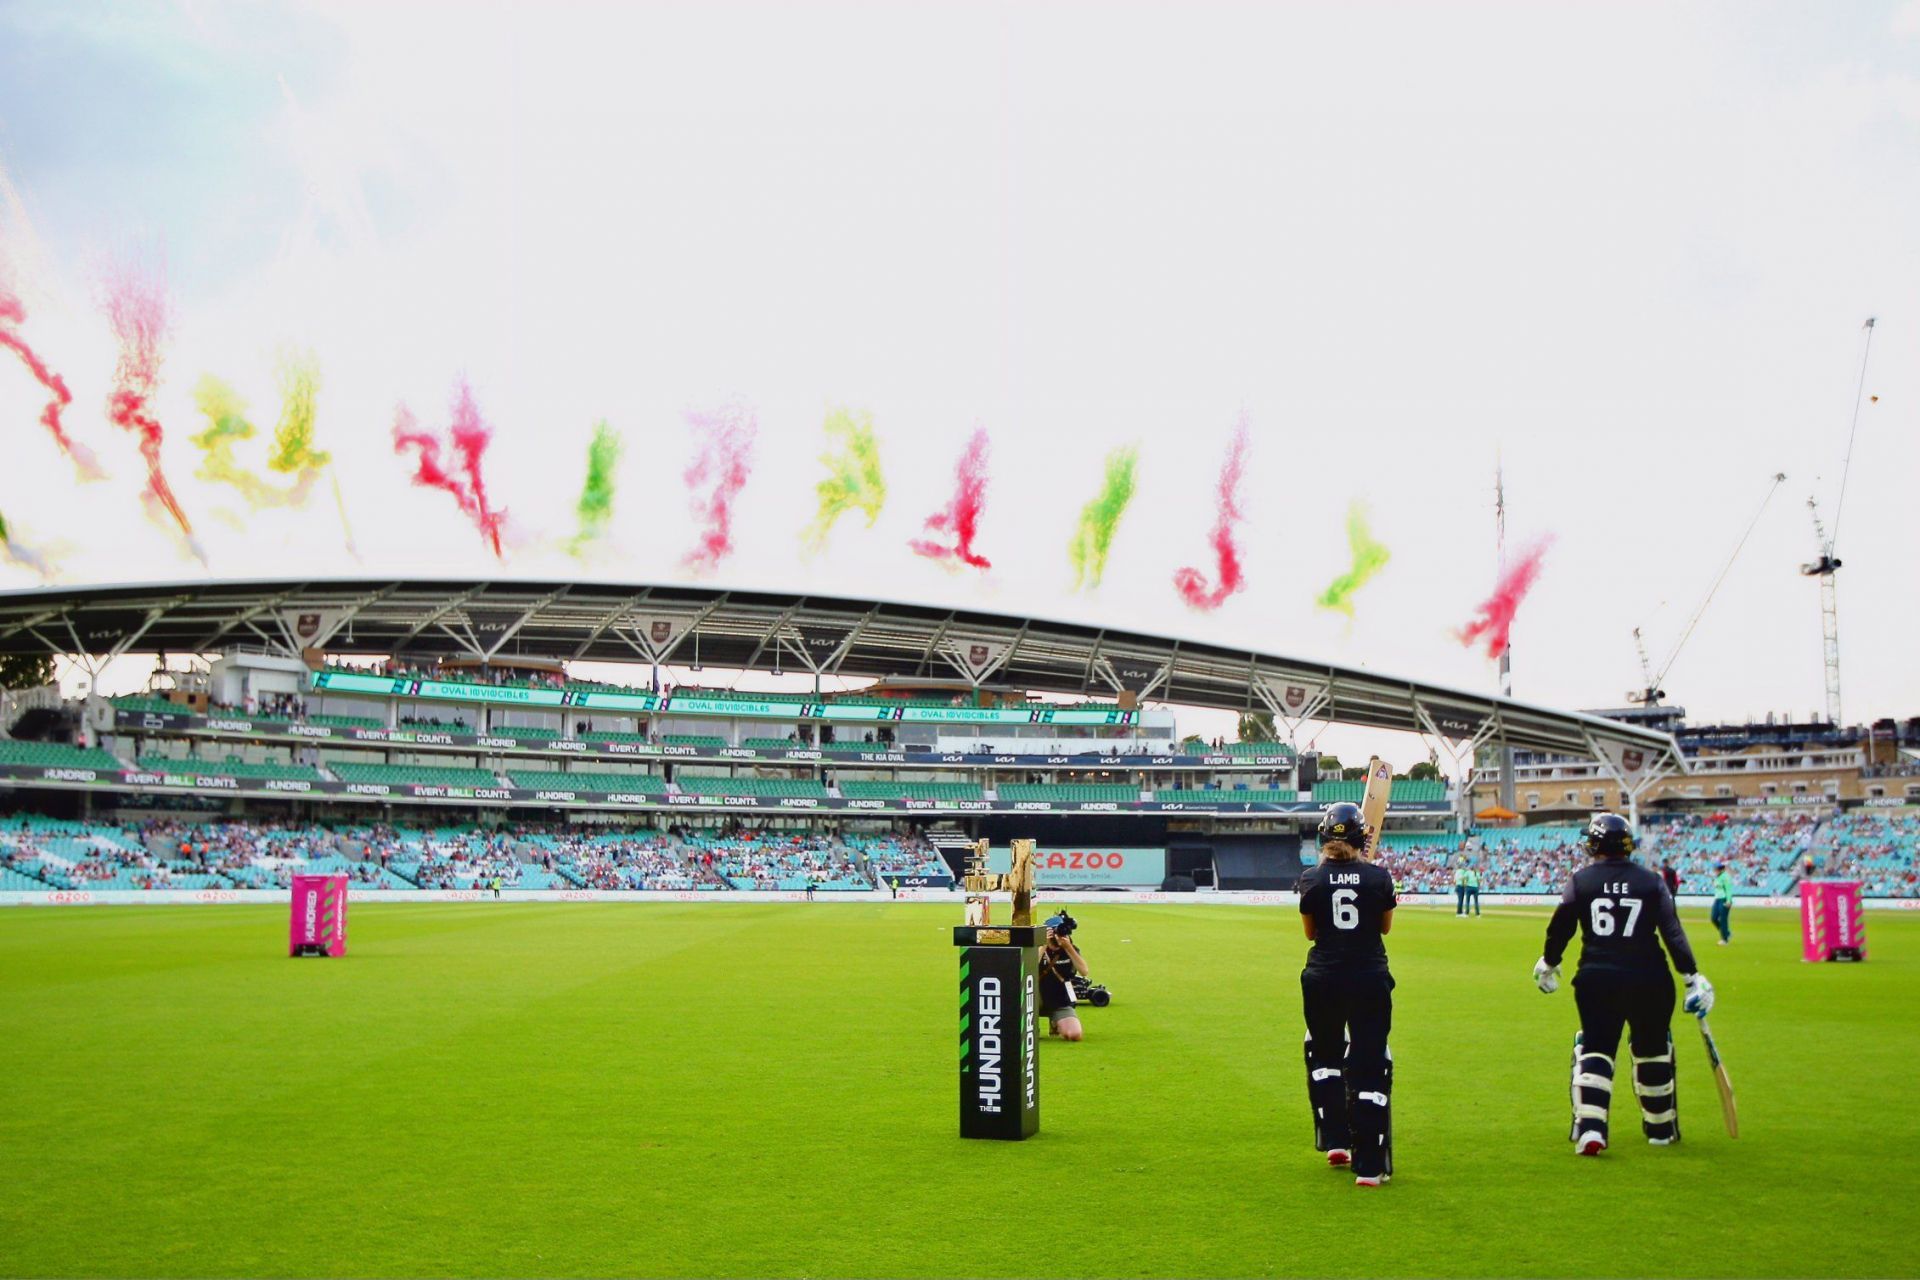 A Hundred fixture at the Oval. (Credits: Twitter)